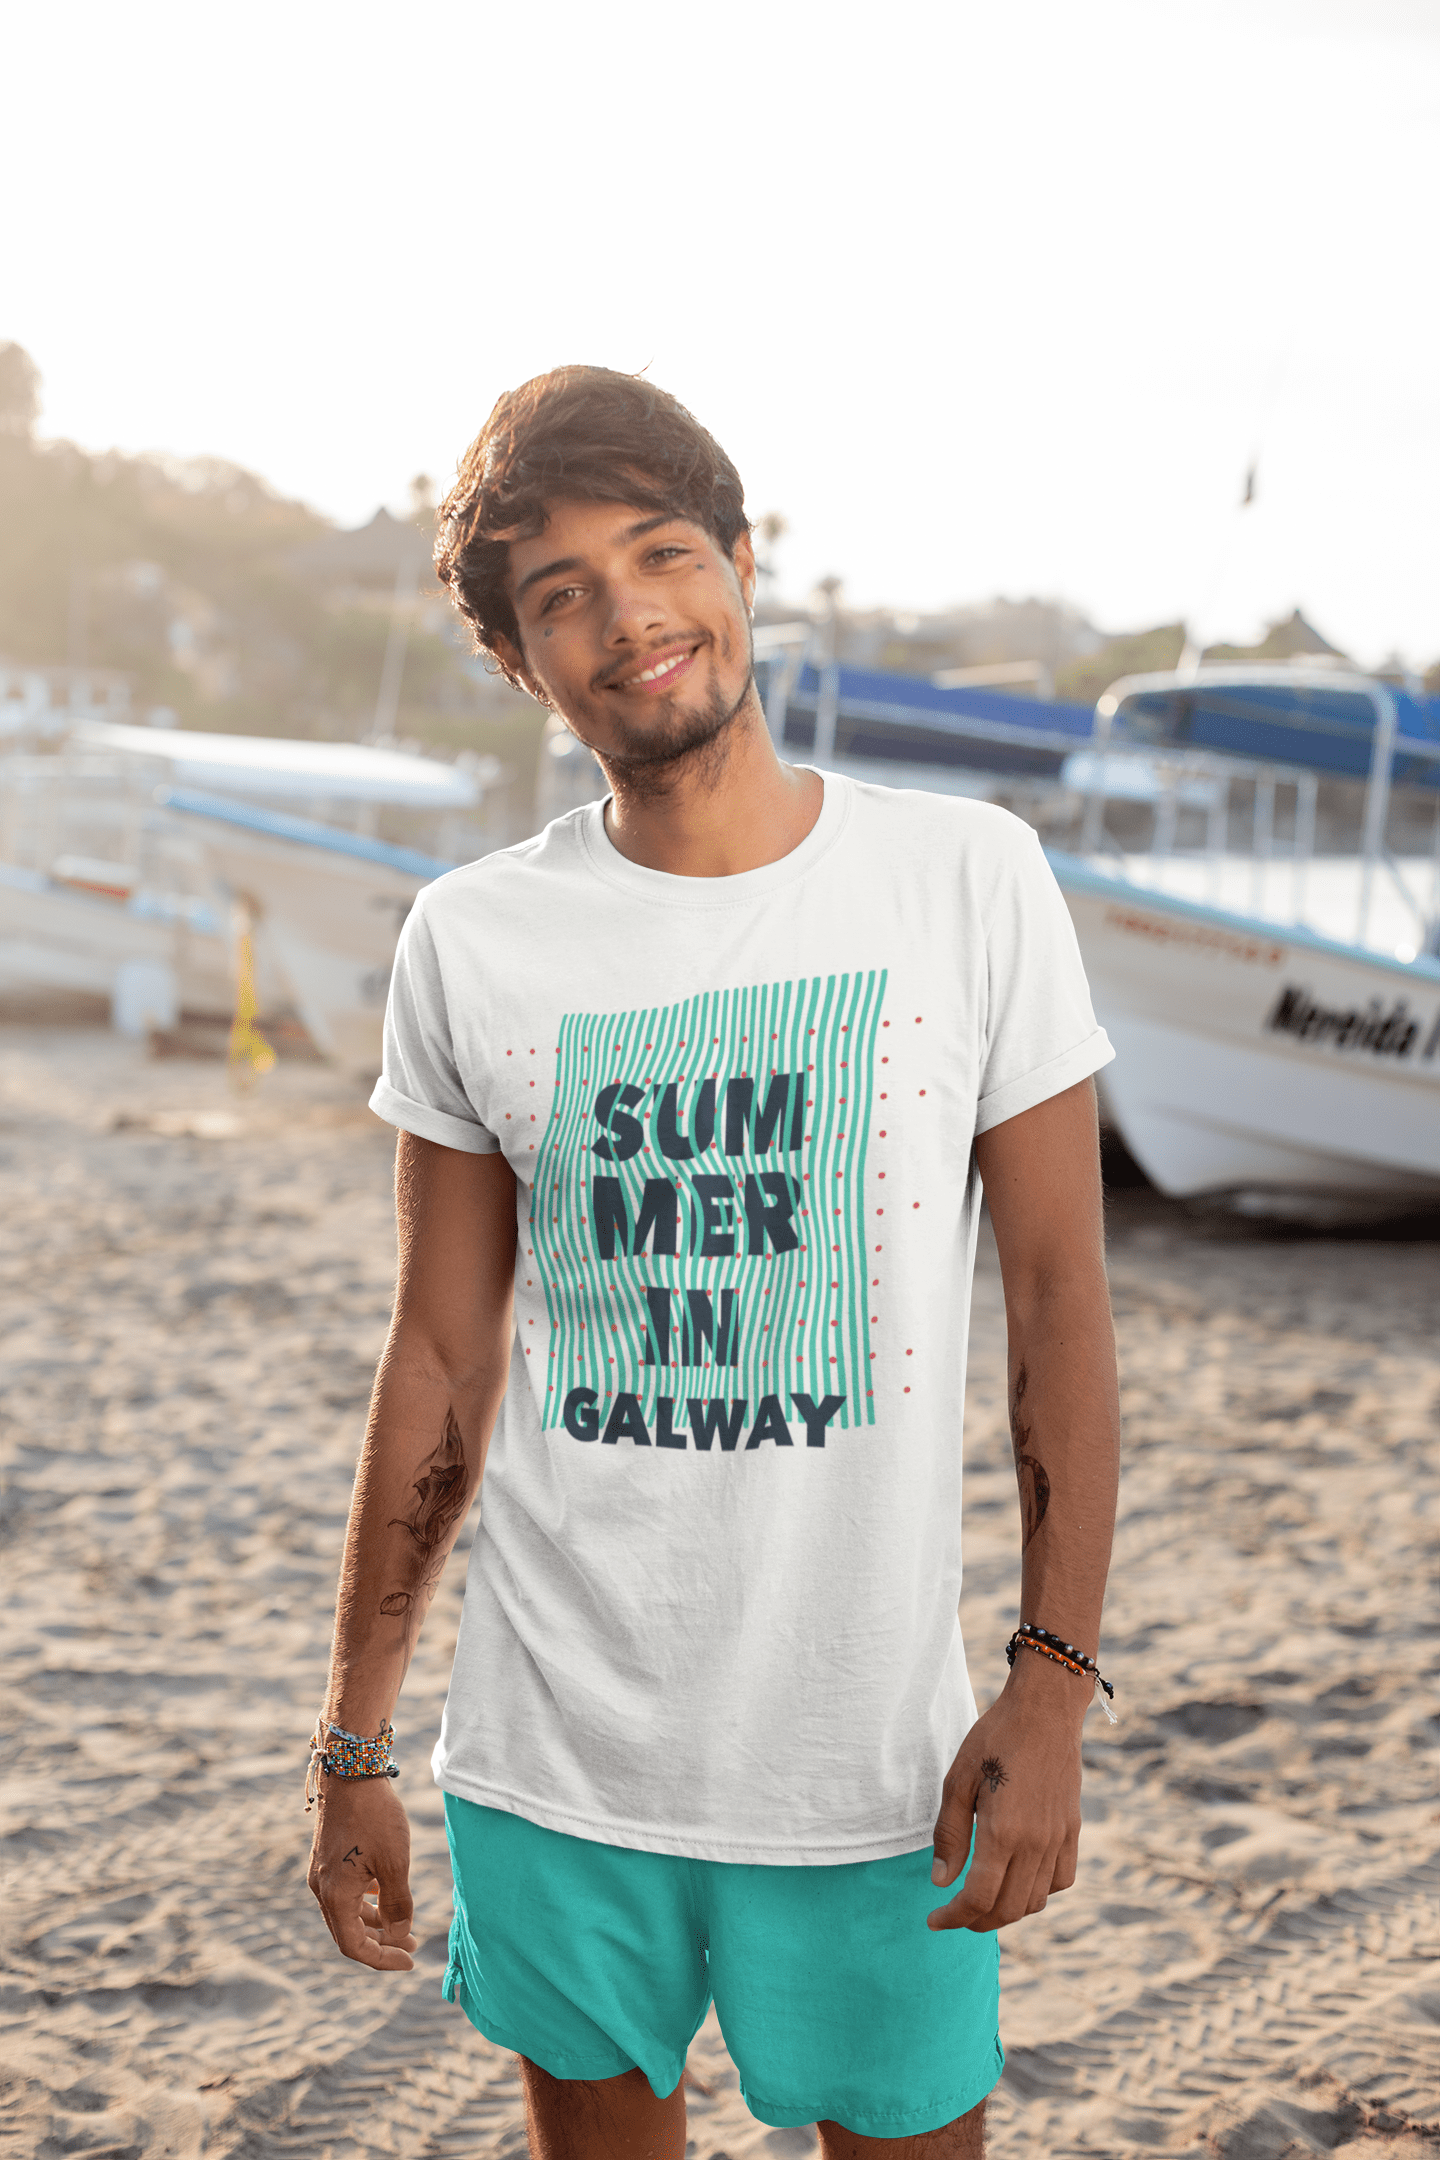 Ultrabasic – Homme Graphique Summer in Galway Blanc